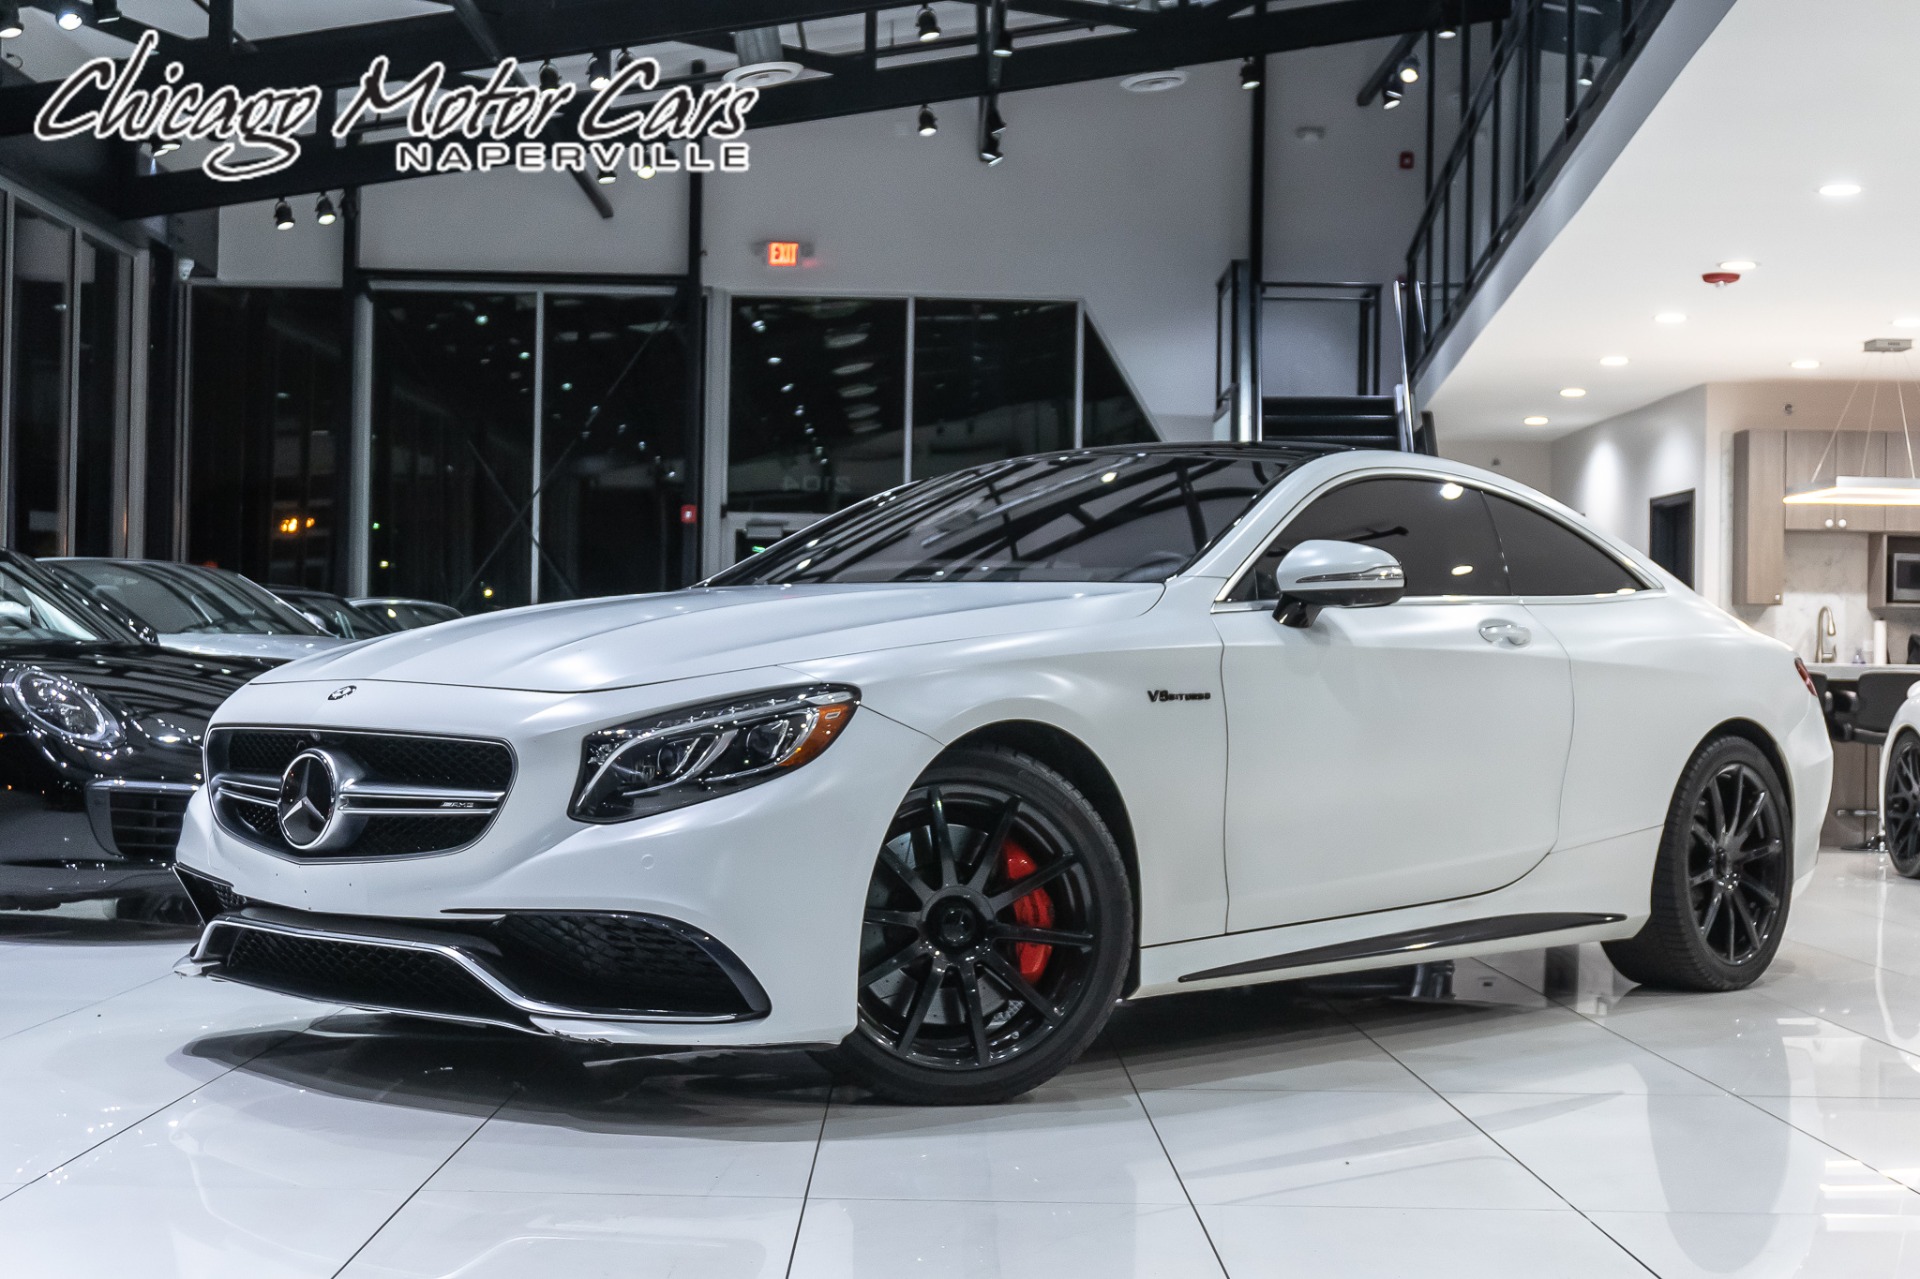 Used 15 Mercedes Benz S63 Amg Coupe 4matic Pearl White Vinyl Wrap Driver Assist Burmester Distronic Plus For Sale Special Pricing Chicago Motor Cars Stock